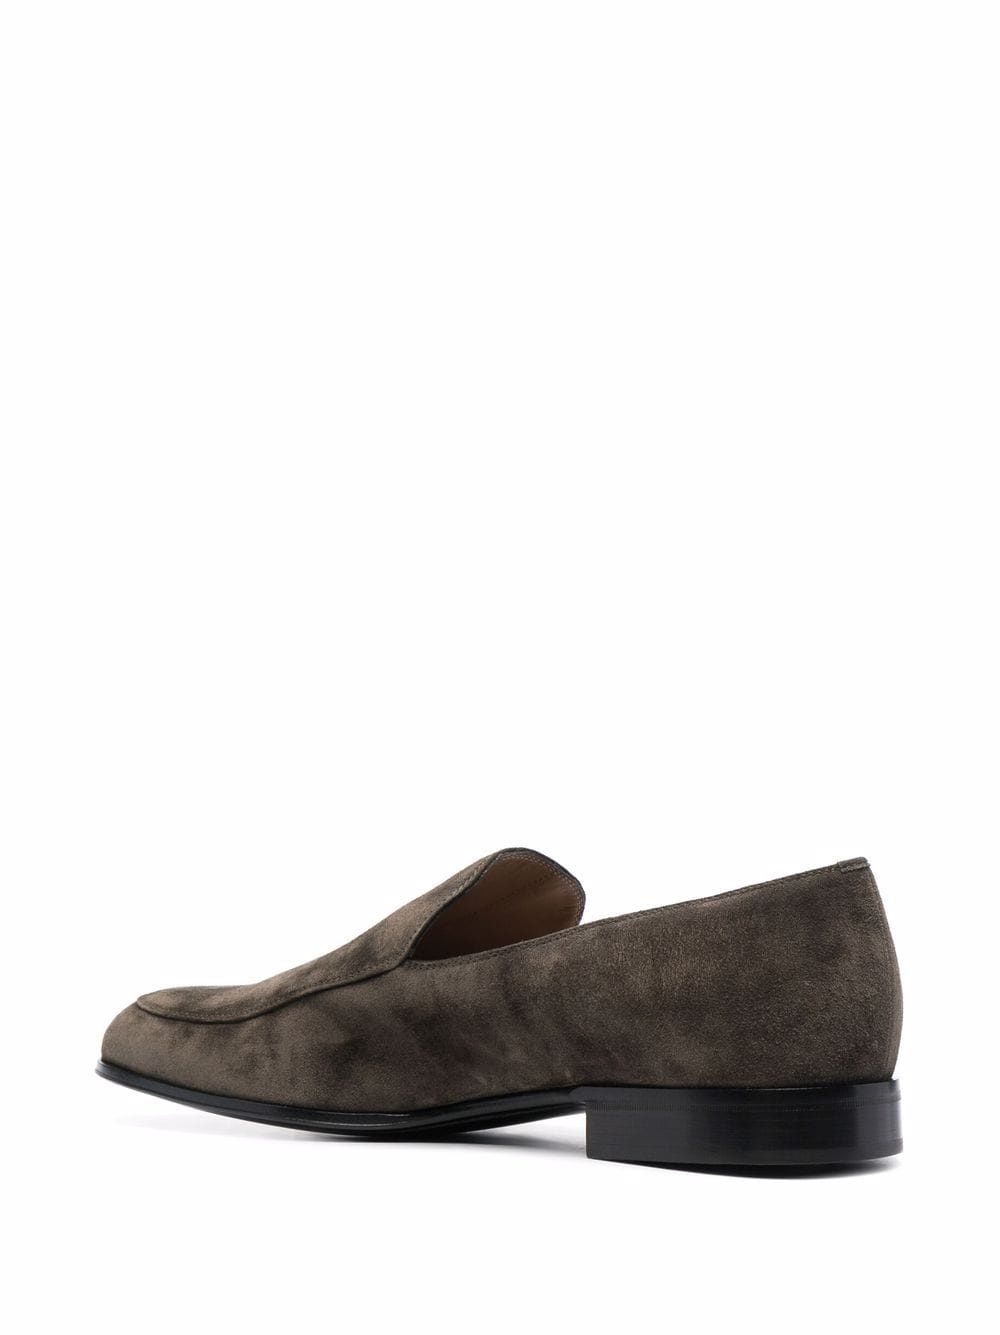 suede-leather loafers - 3